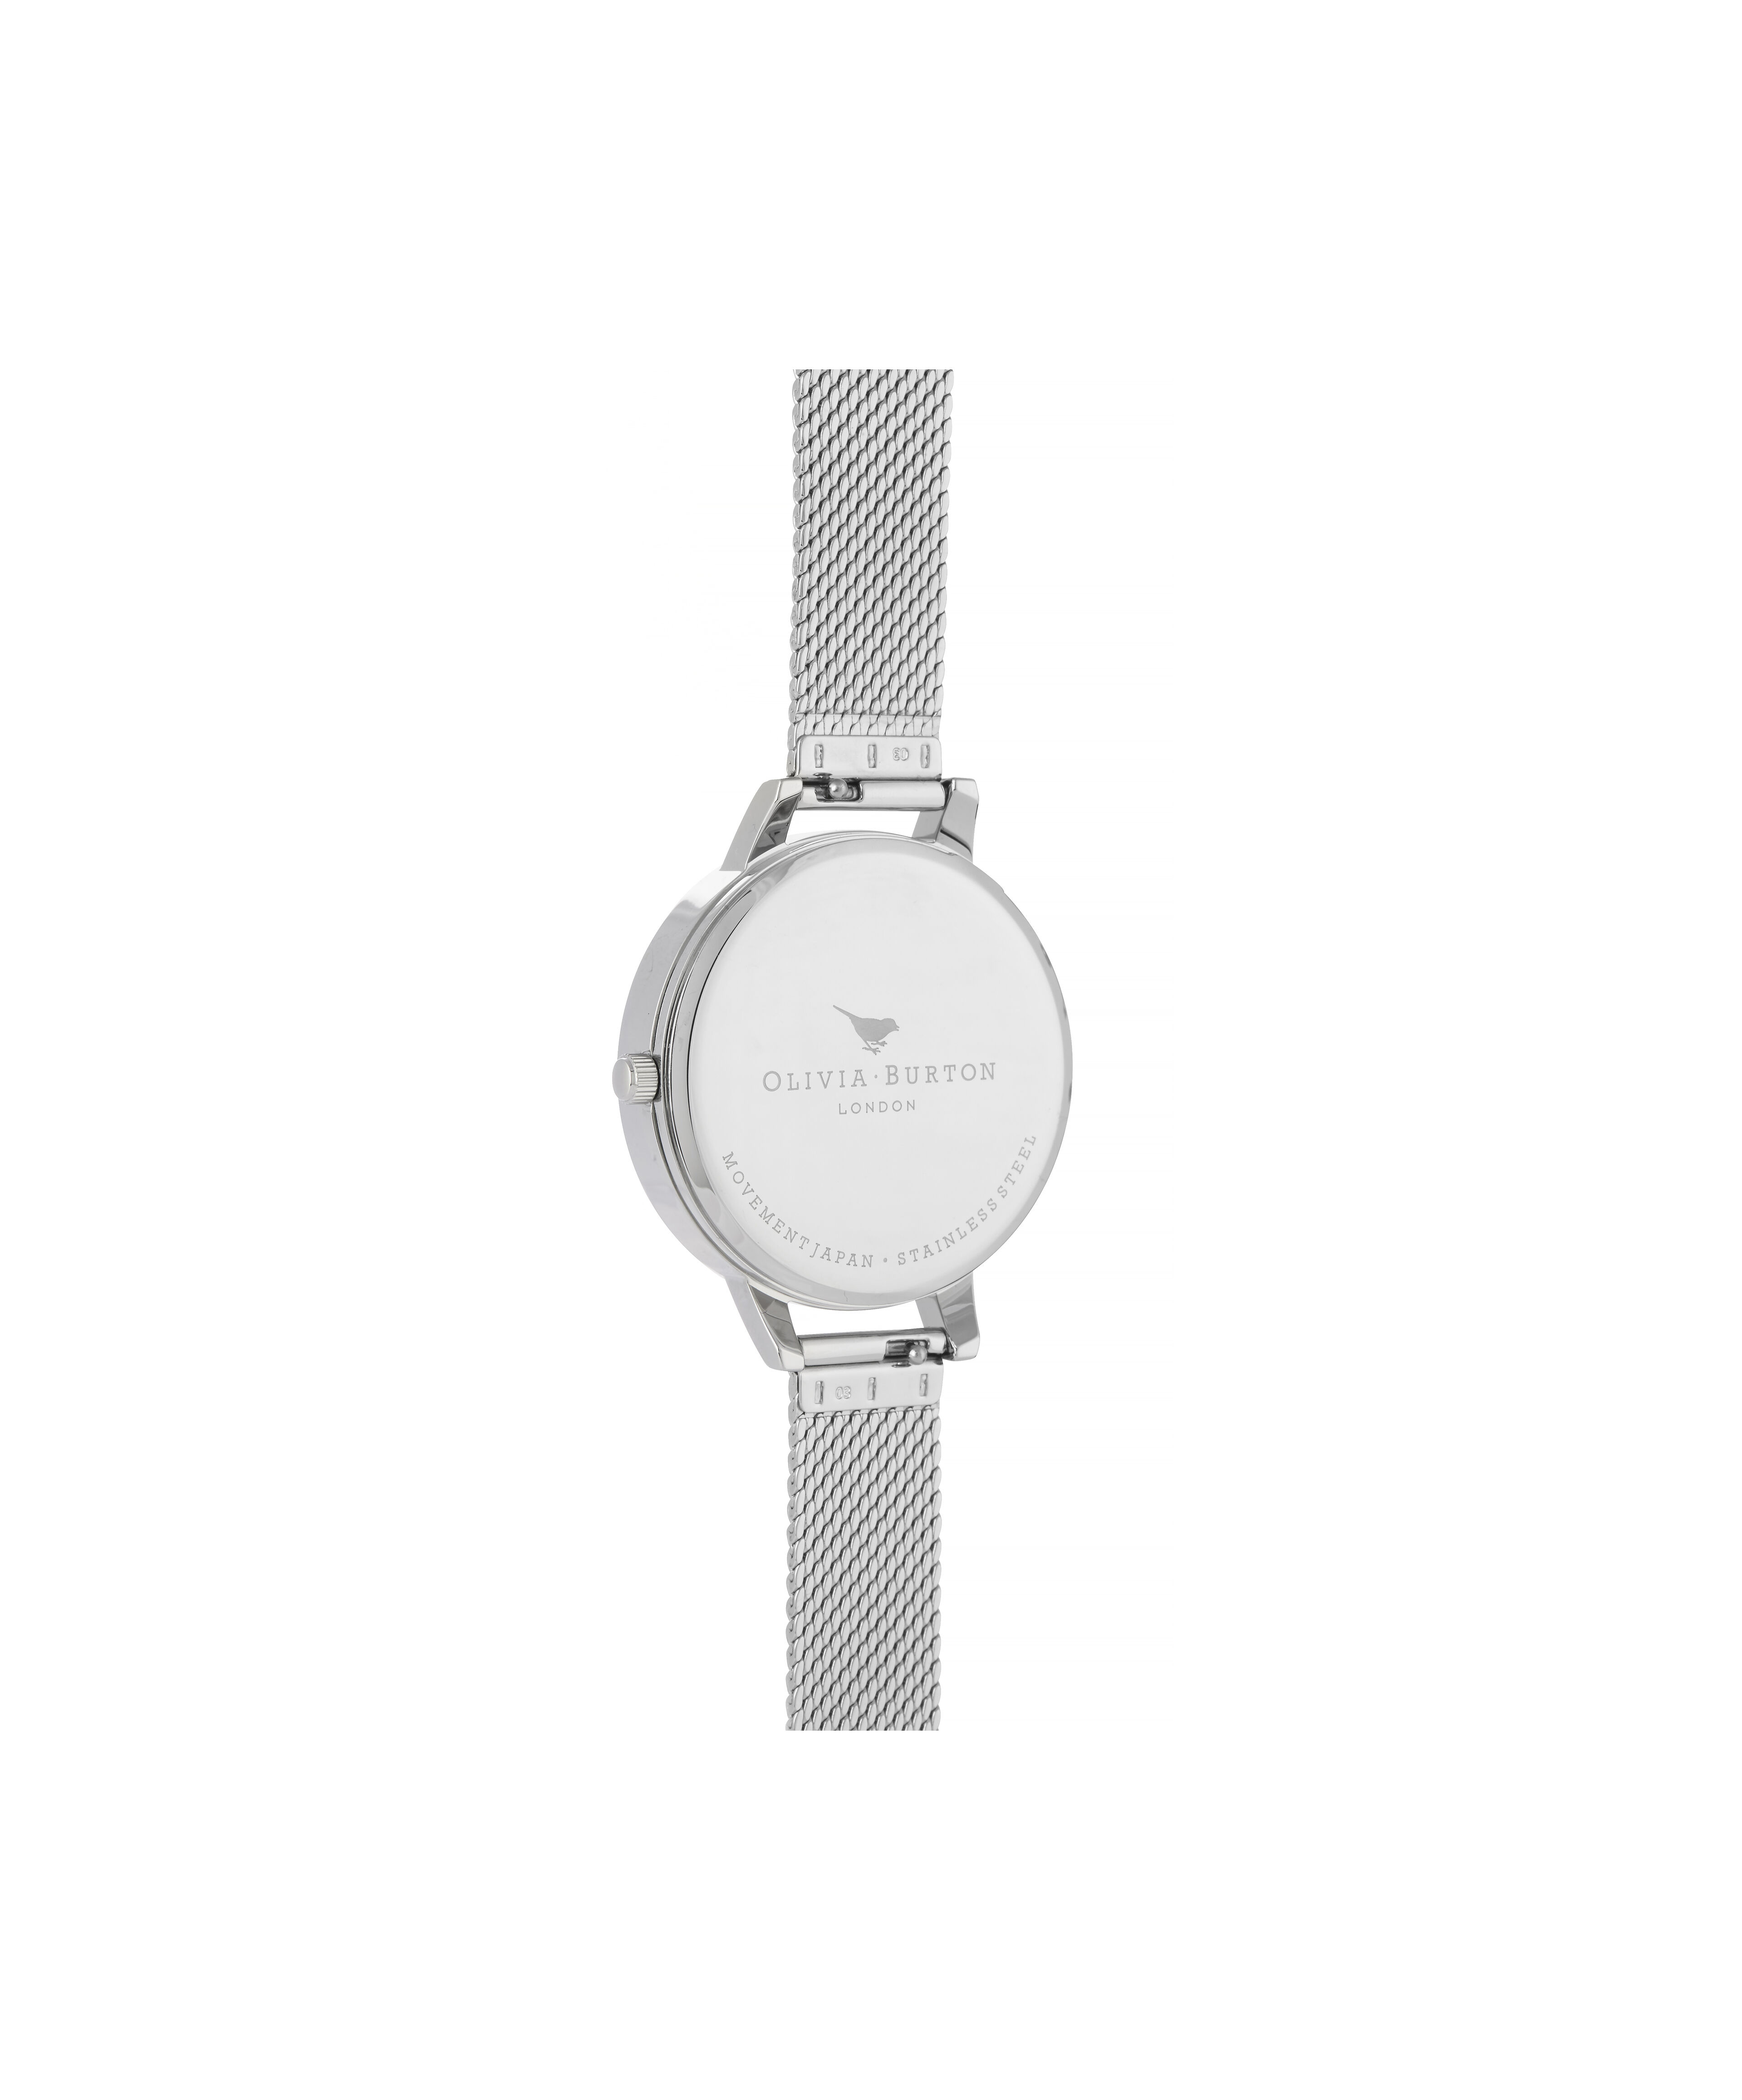 Celestial Demi Dial Watch with Boucle 